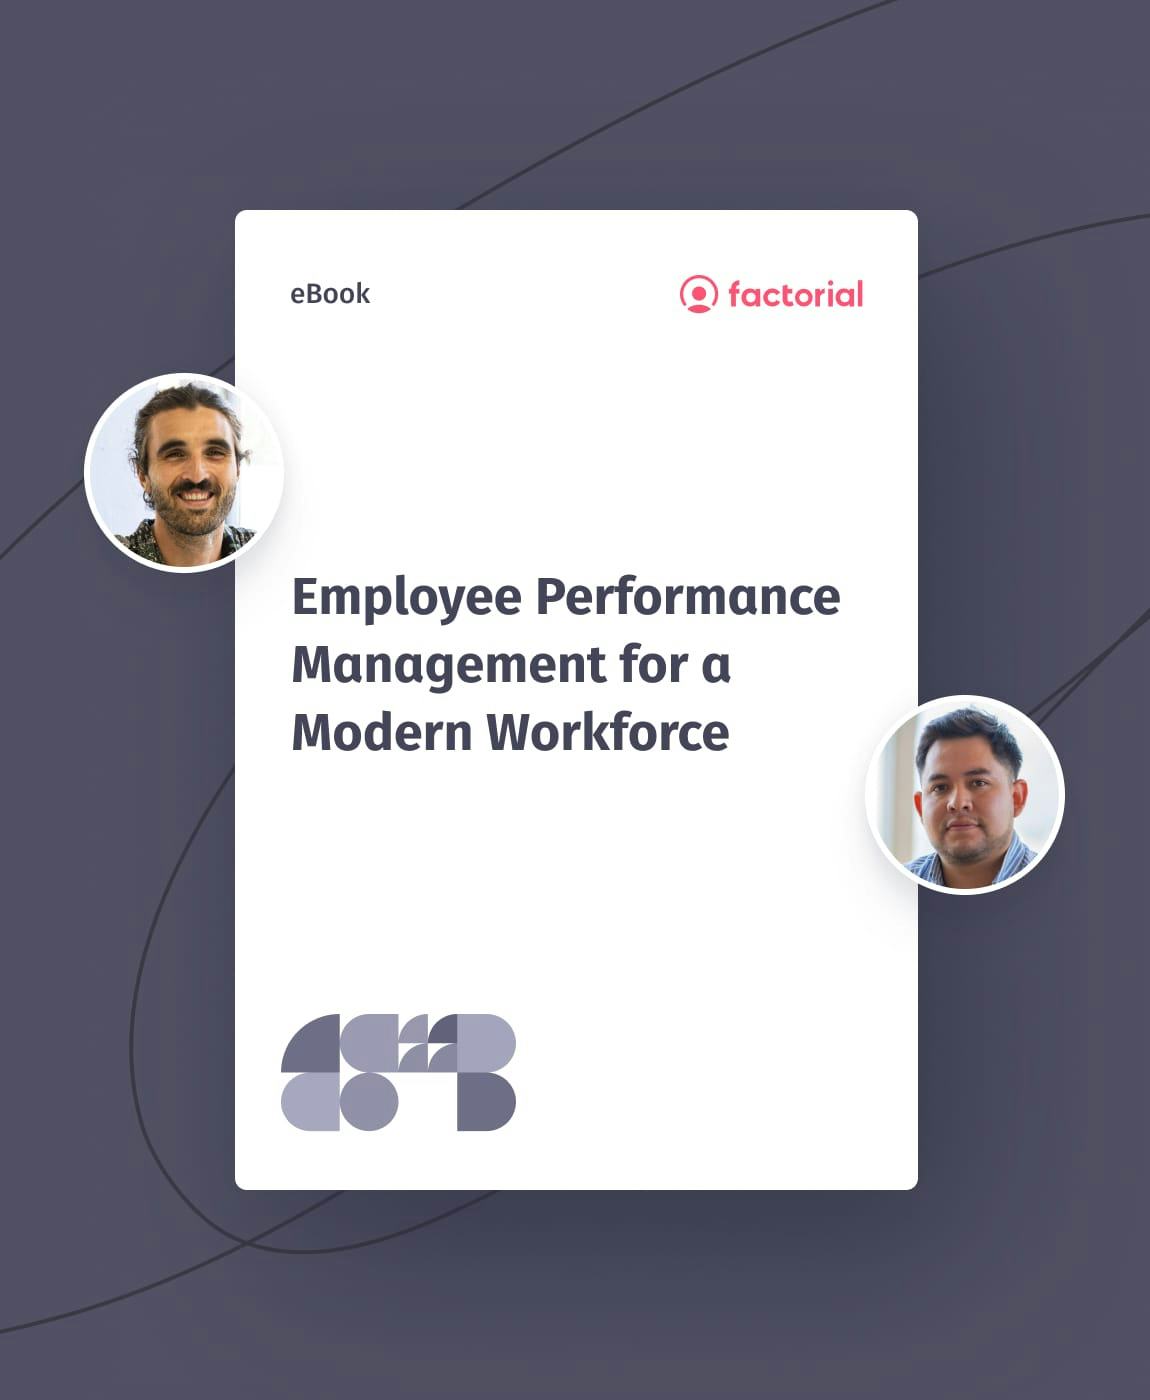 Employee Performance Management for a Modern Workforce